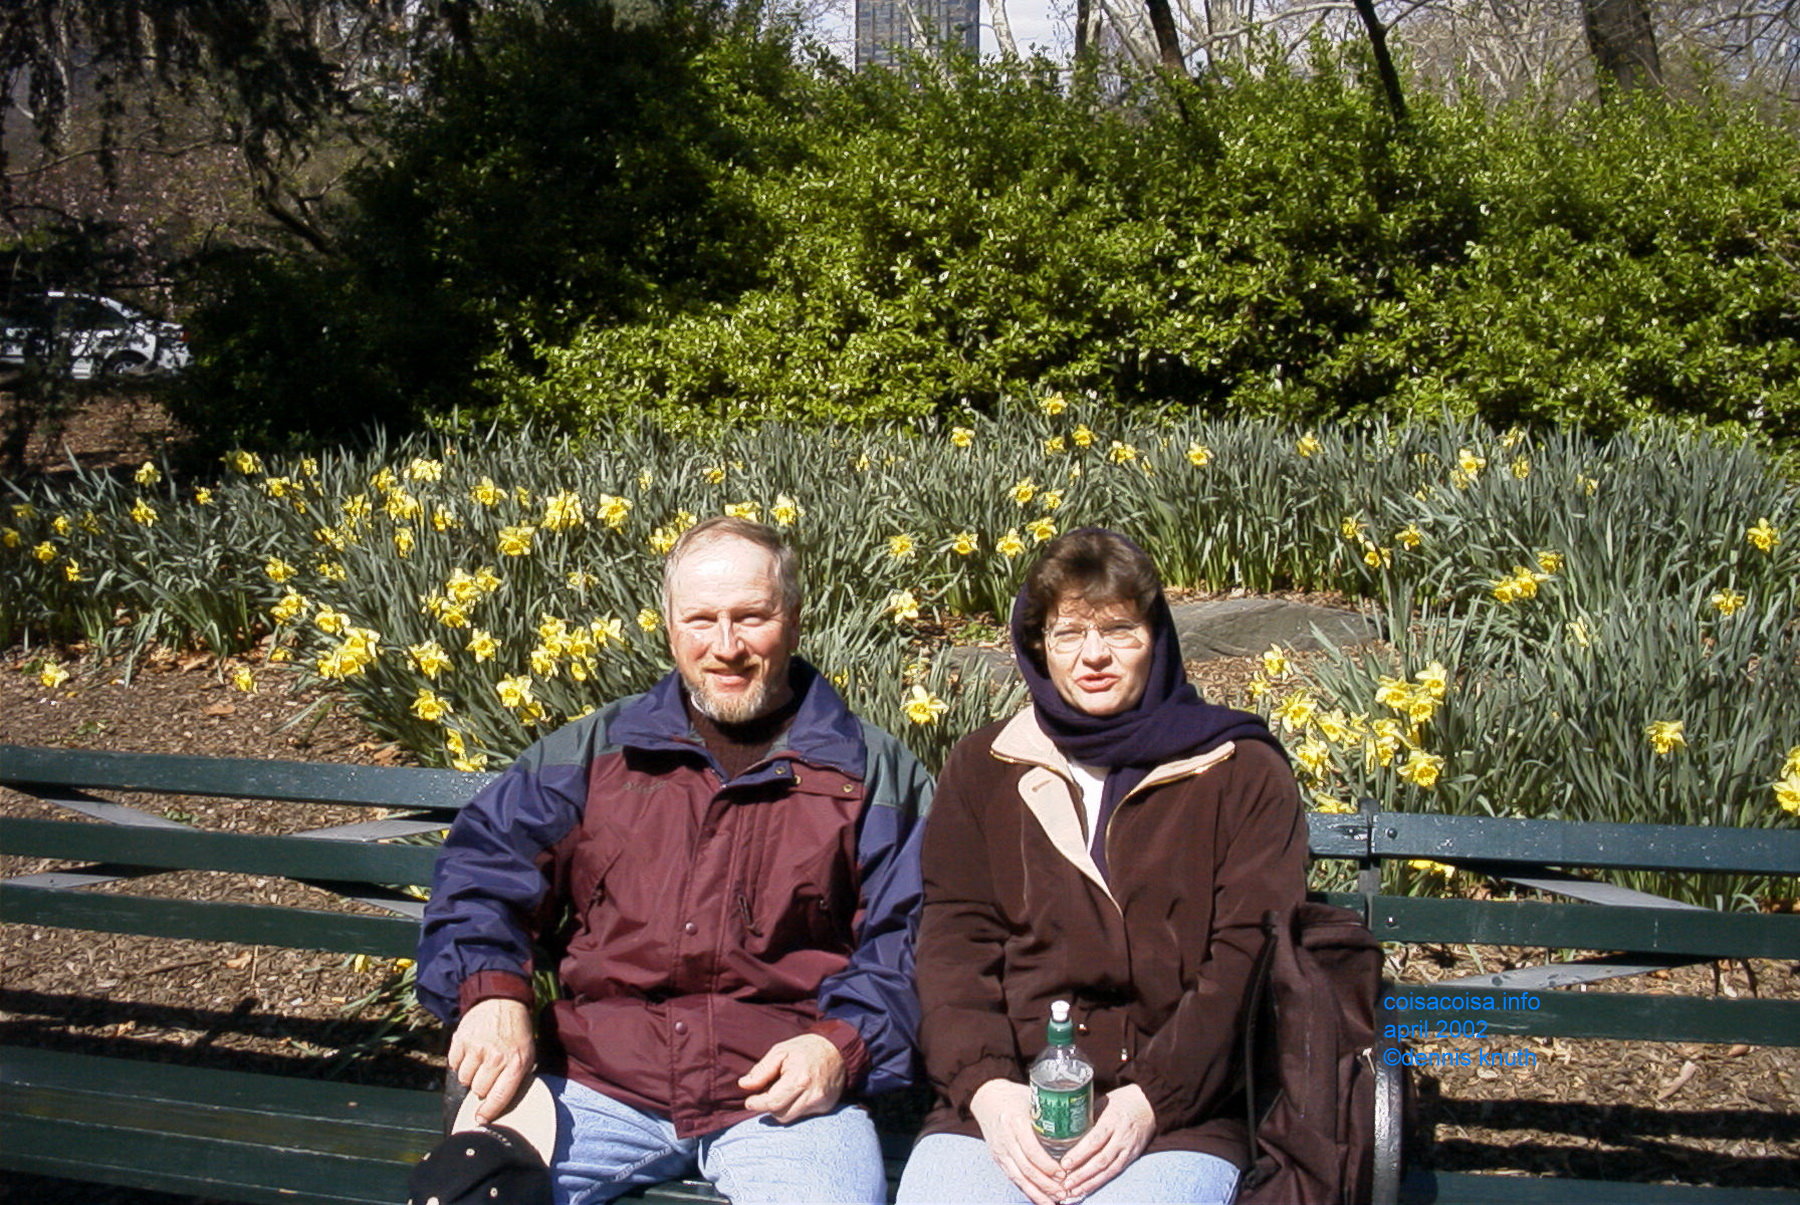 Daffodils and Jonquils and people in the Park